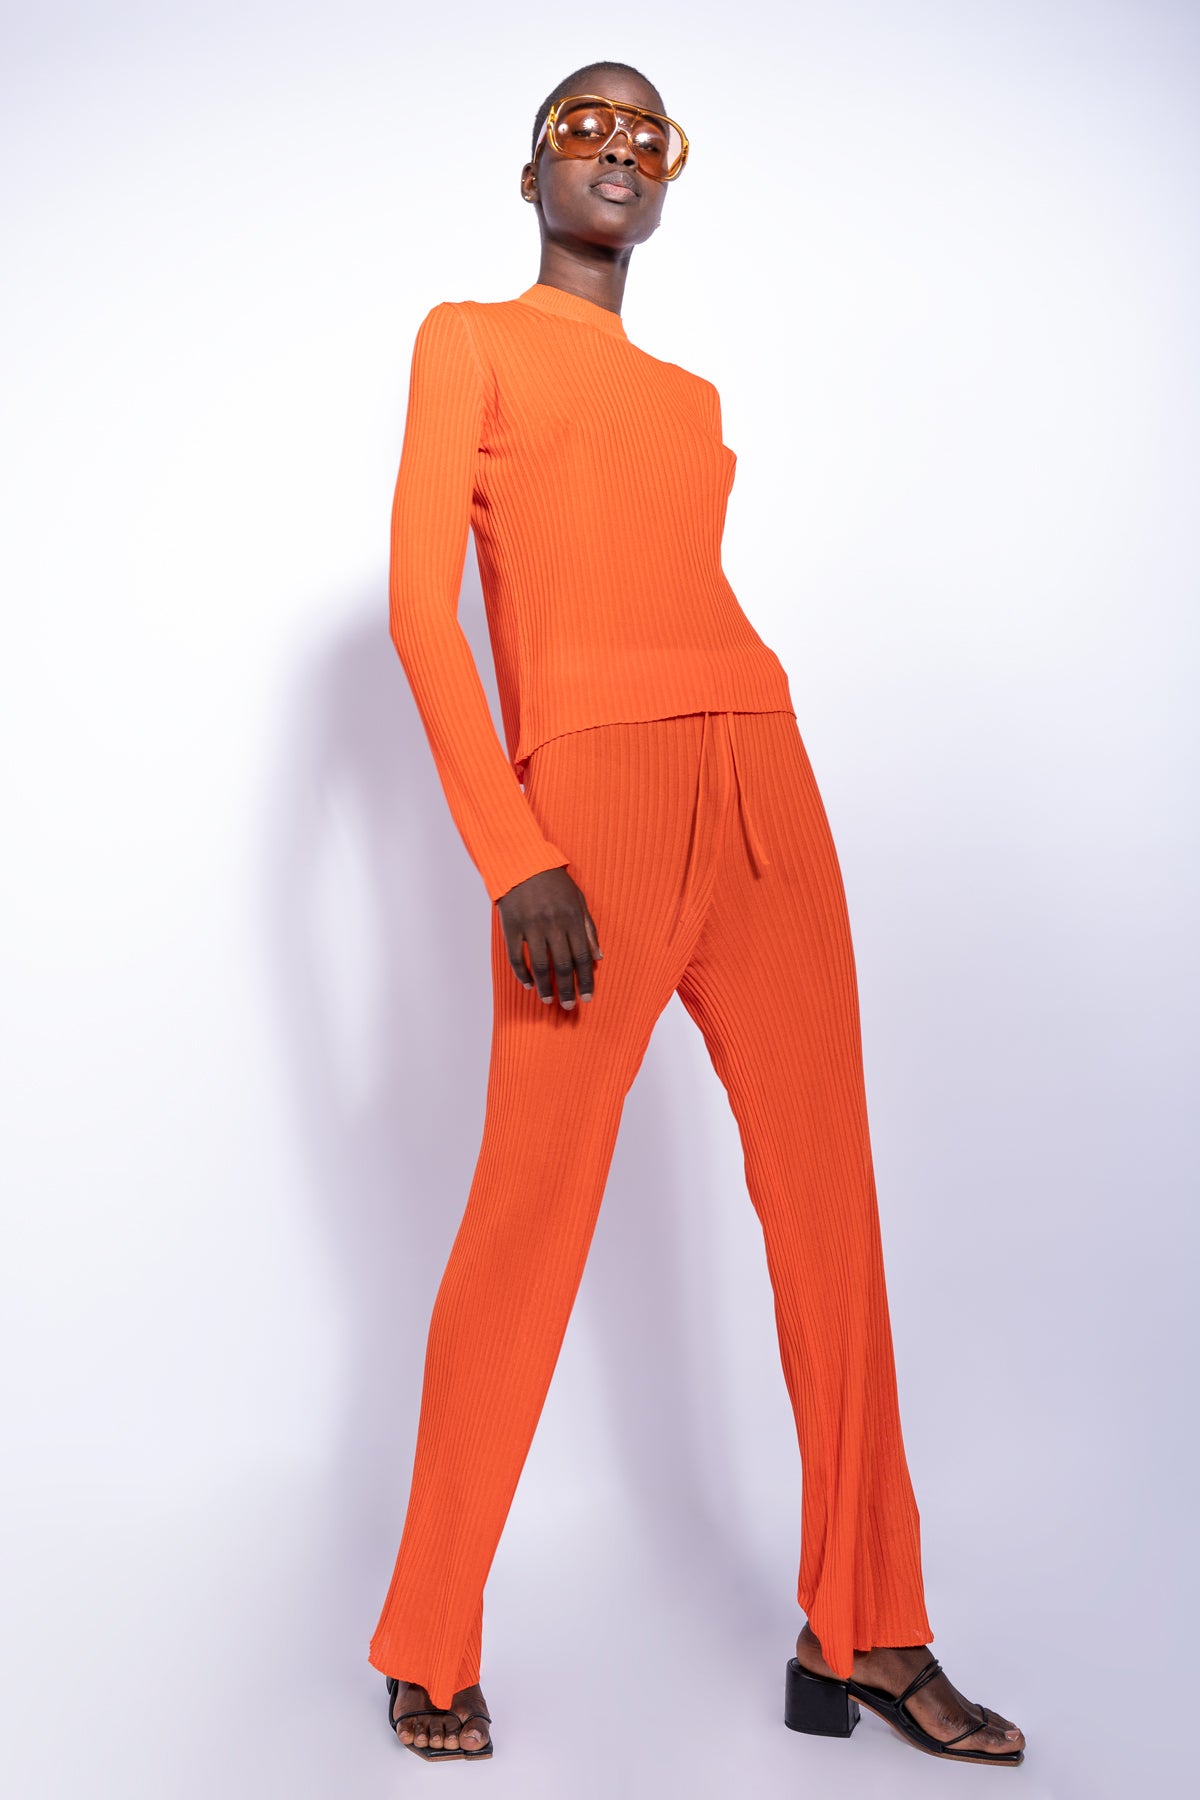  ORANGE KNITTED TROUSERS IN LIGHT WEIGHT KNIT marques almeida